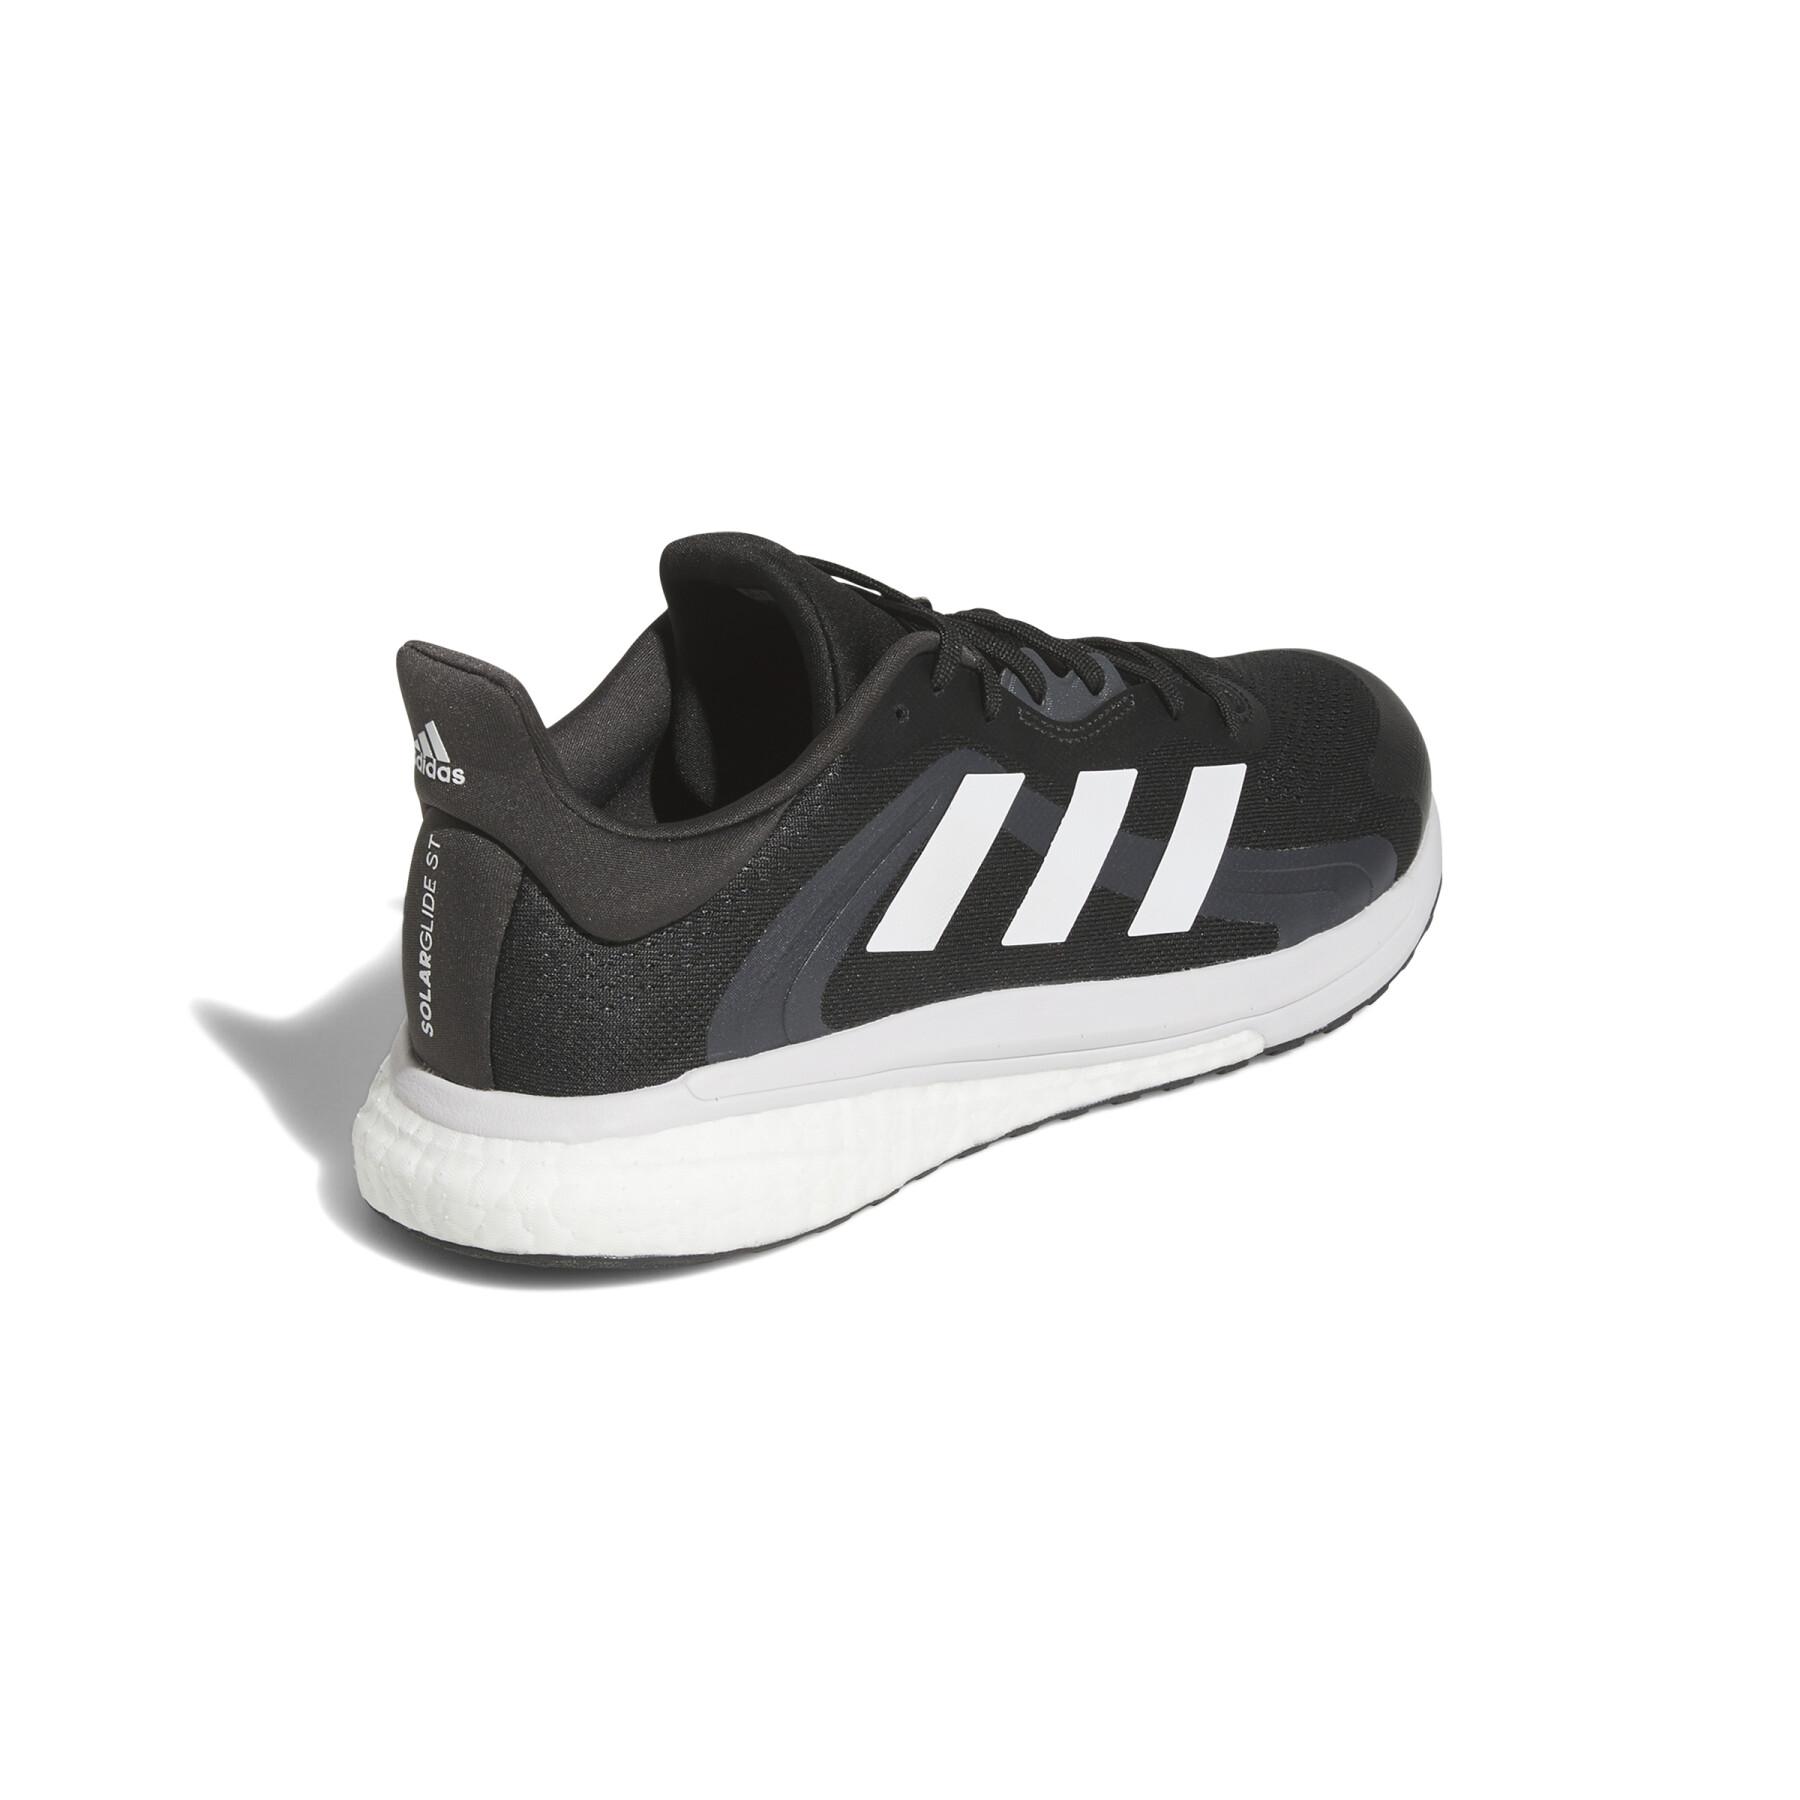 Running shoes adidas SolarGlide 4 ST